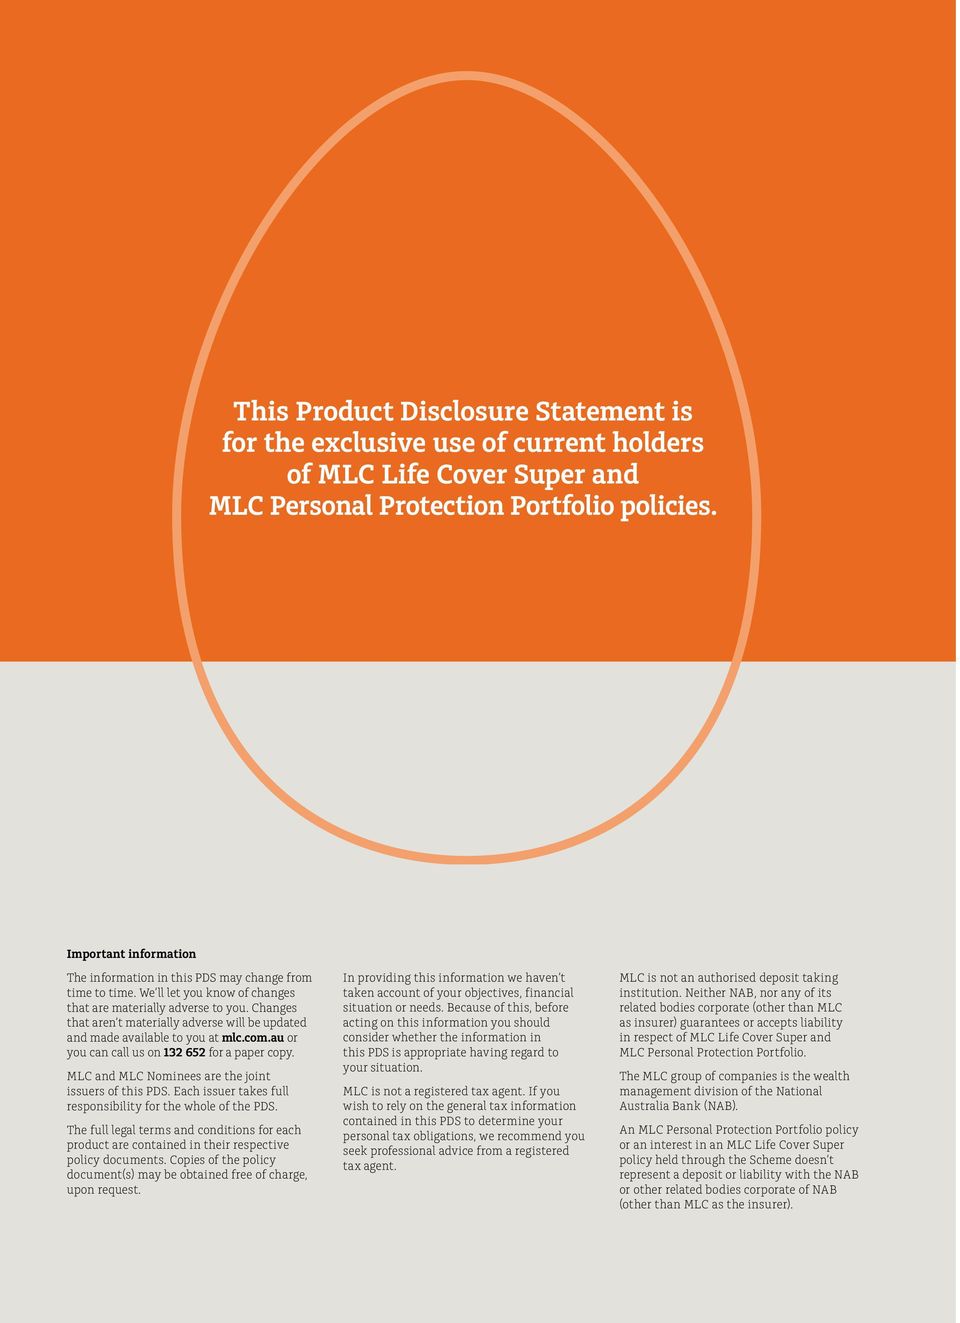 Changes that aren t materially adverse will be updated and made to you at mlc.com.au or you can call us on 132 652 for a paper copy. MLC and MLC Nominees are the joint issuers of this PDS.